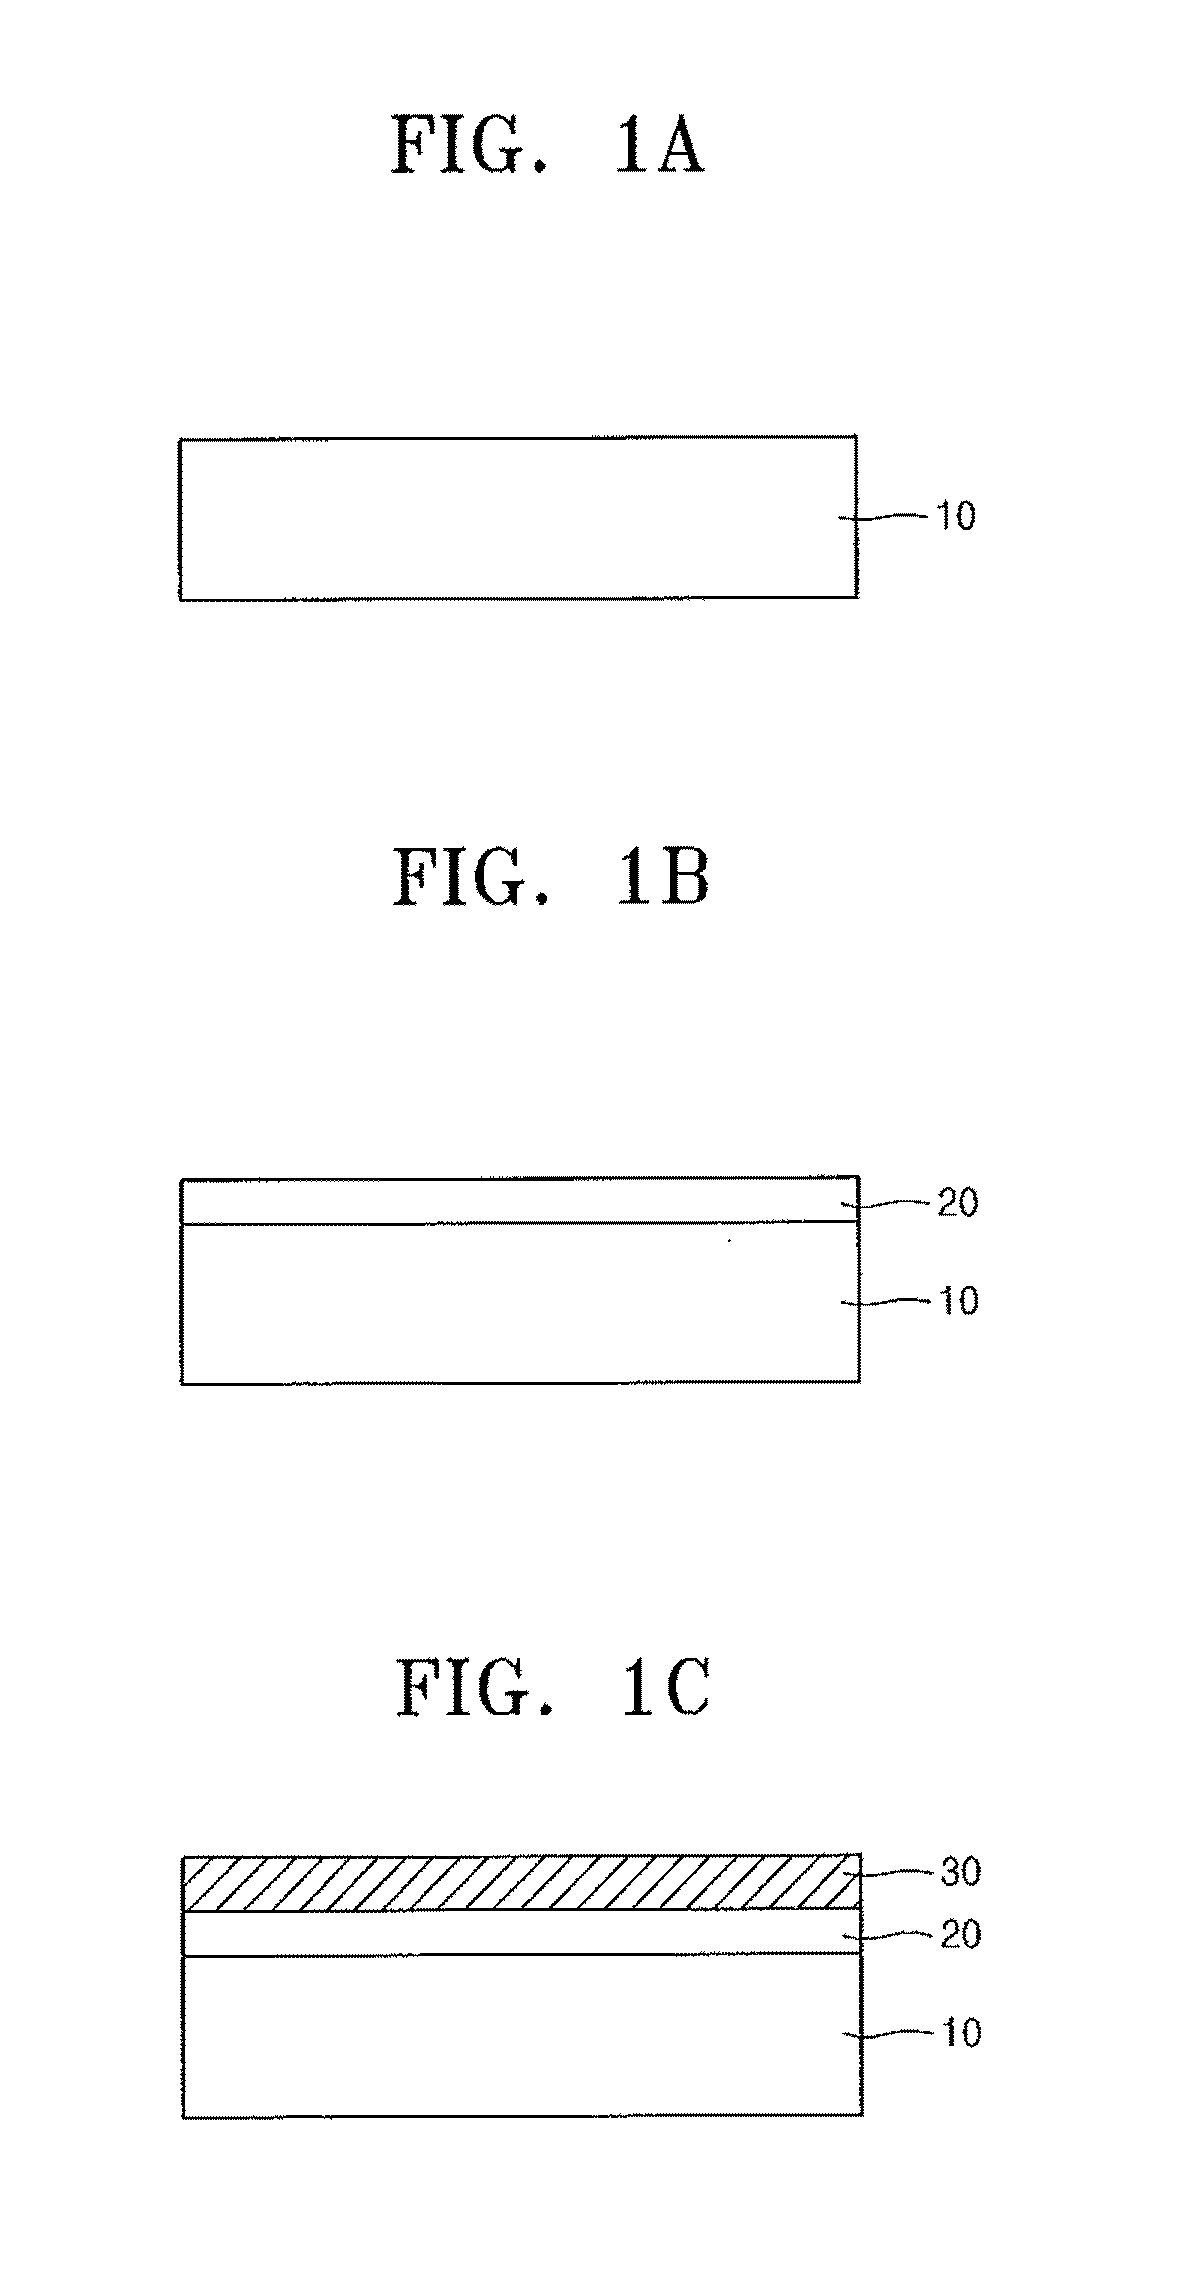 Compound containing crosslinkable moieties, prepolymer, blend and polymer sheet obtained therefrom, and waveguide for optical interconnection